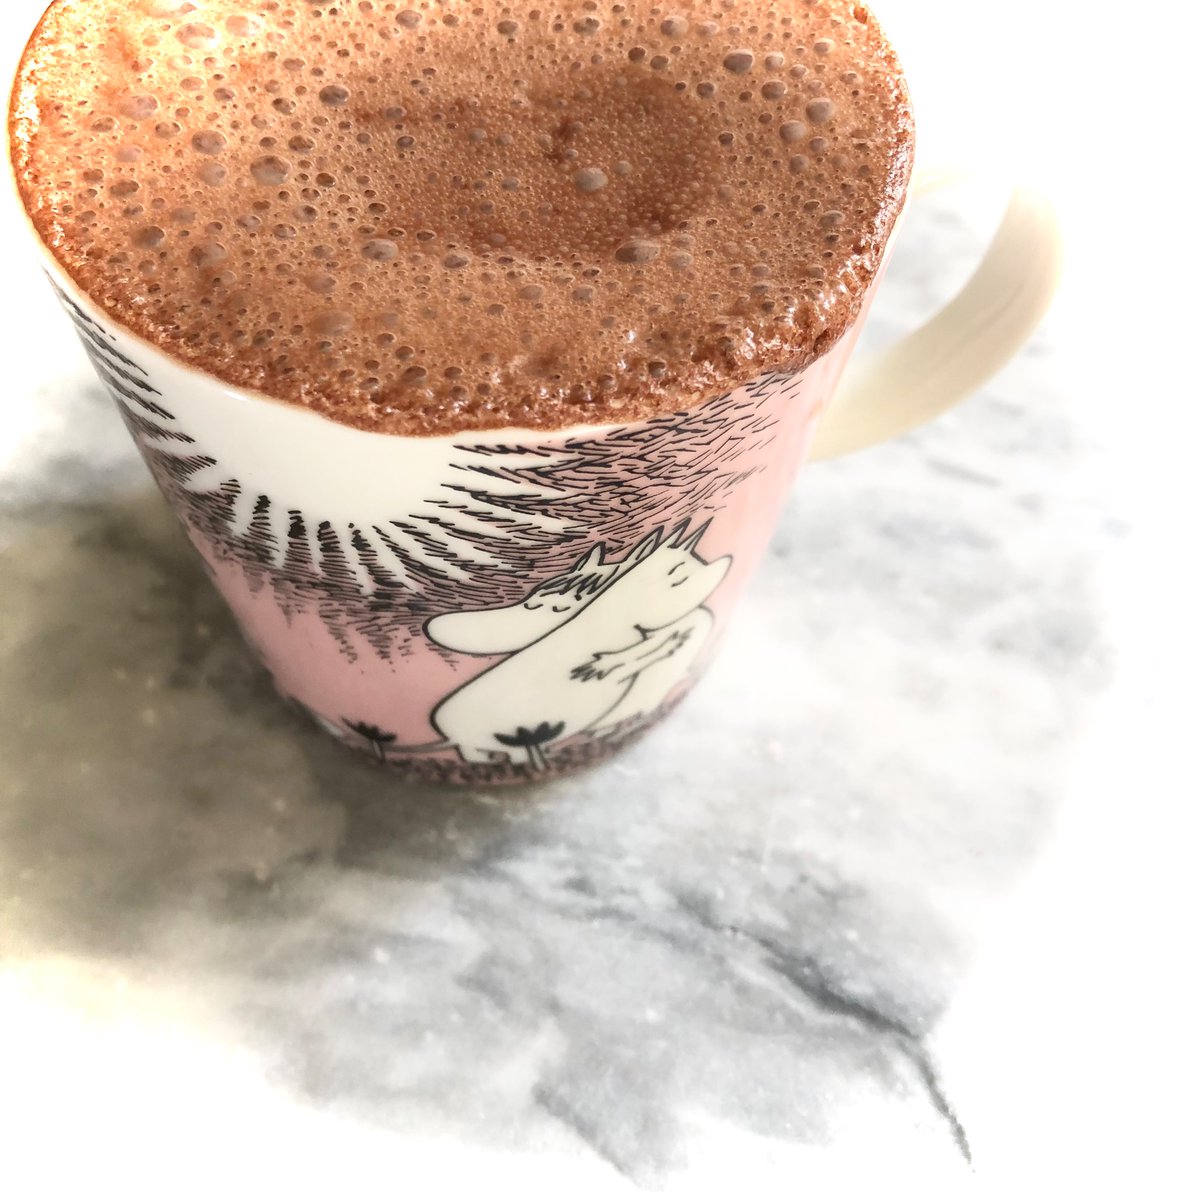 #veganhour @veganhour always love these! High #protein raw #cacao drinks super frothy post #run with @Alpro vanilla @pulsinhq and @Naturya #plantbased